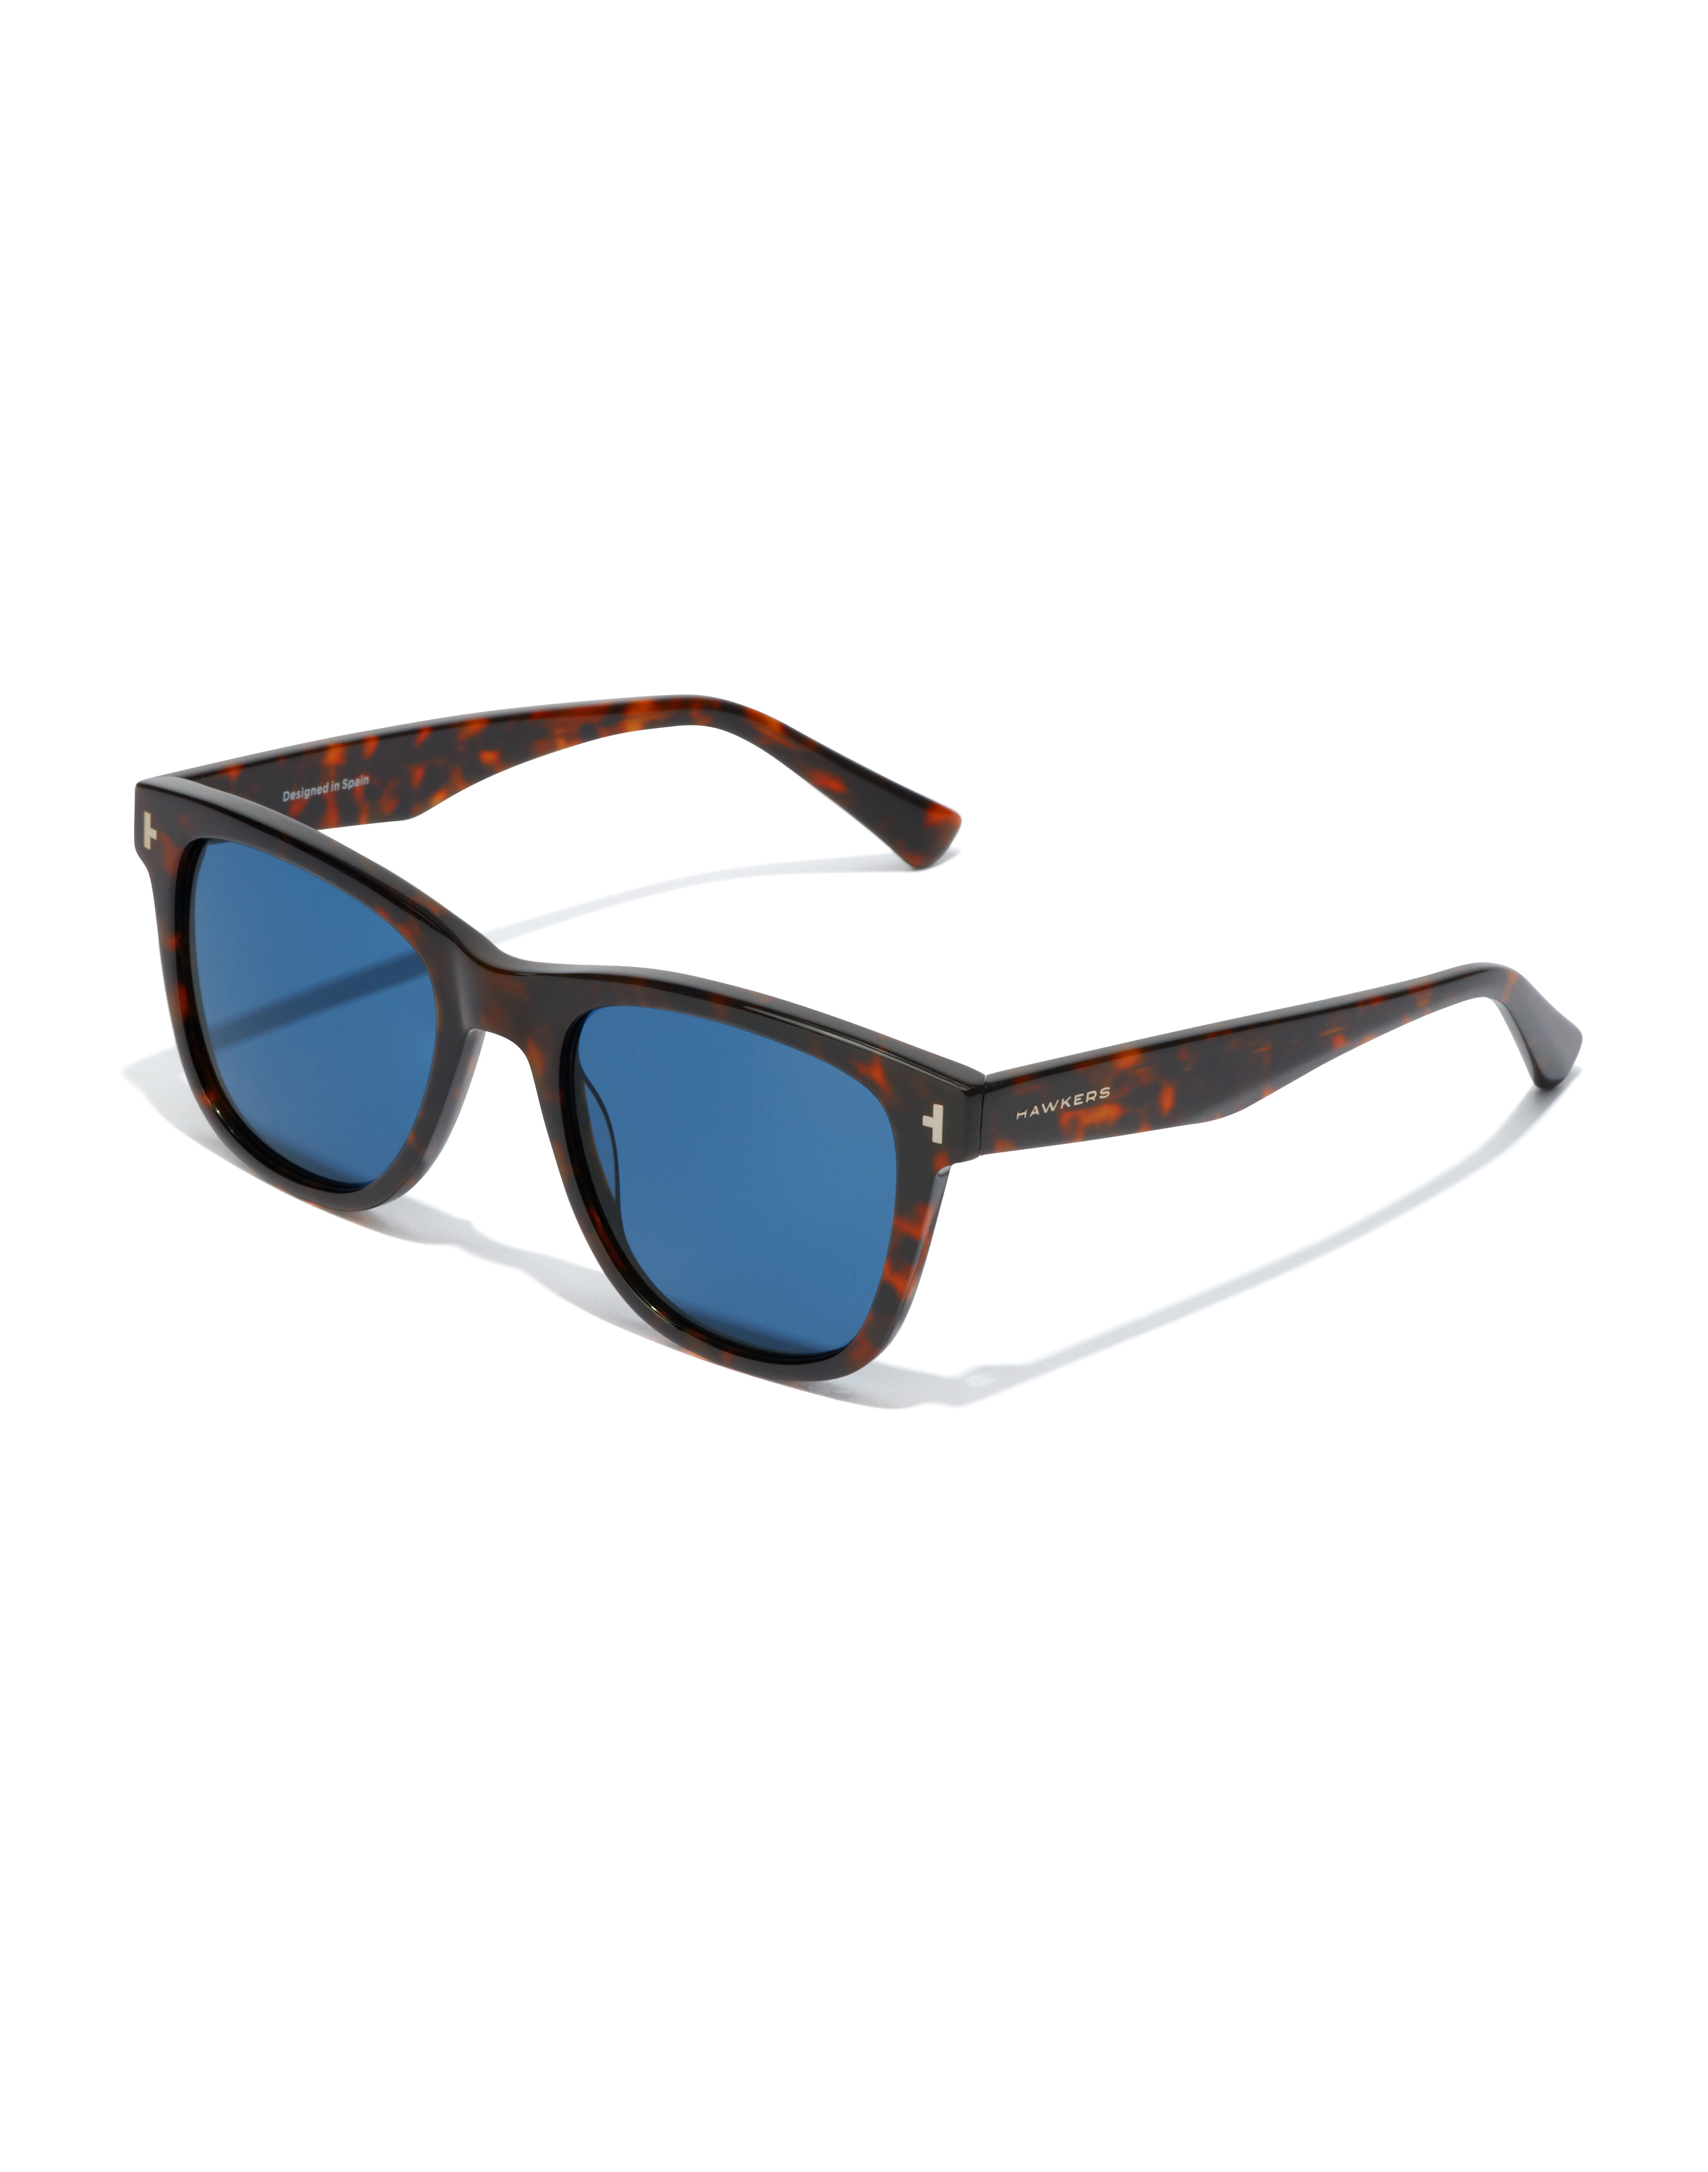 Hawkers HAWKERS Carey Blue Night ONE PAIR Sunglasses for Men and Women, Unisex. UV400 Protection. Official Product designed in Spain HOPA22CLX0